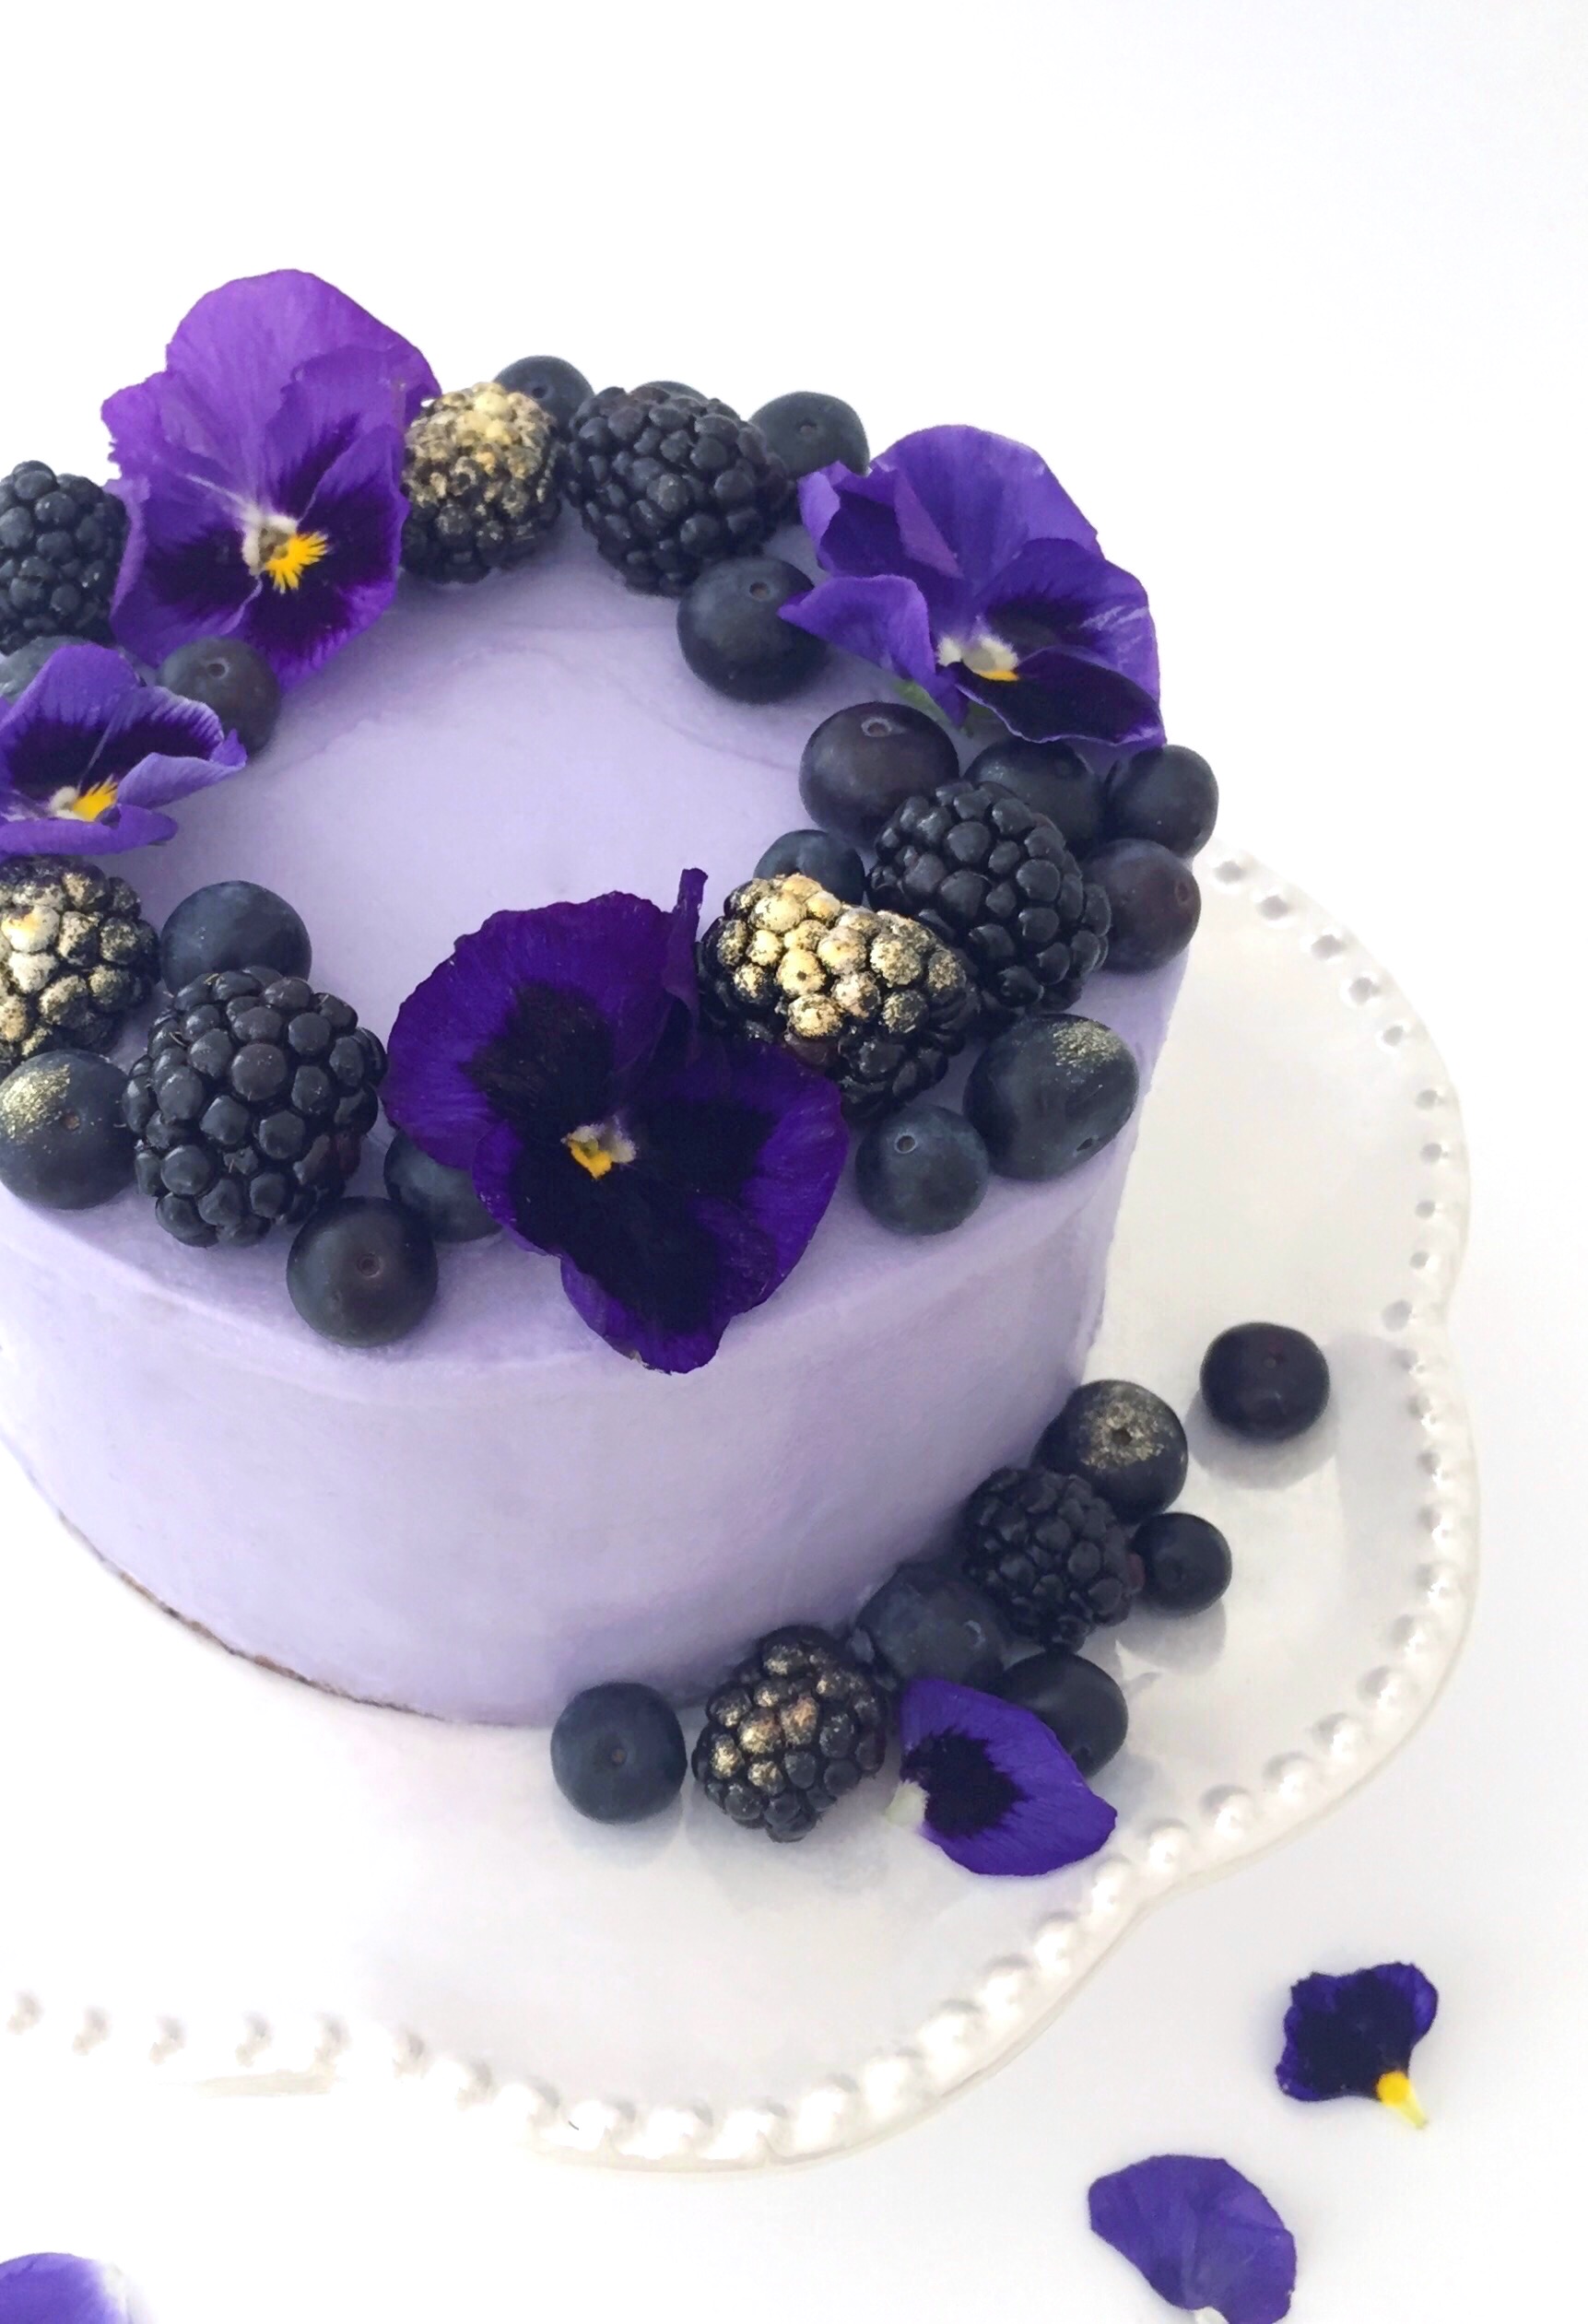 Purple Berry Cake with Silky Cream Cheese Frosting by Brownie Mischief